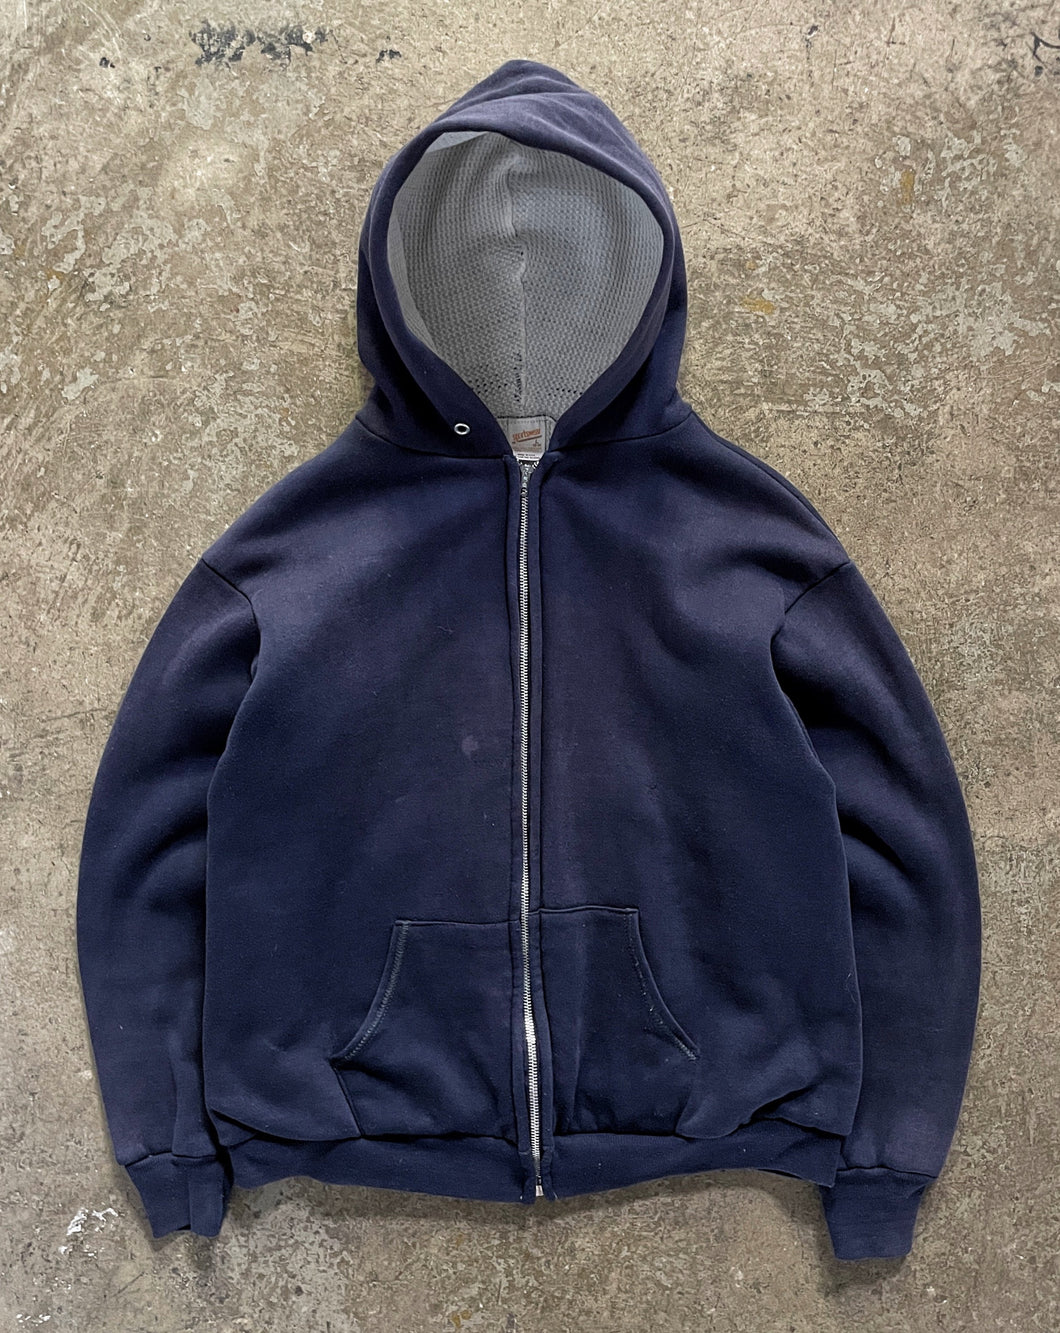 SUN FADED NAVY BLUE THERMAL LINED ZIP UP HOODIE - 1980S